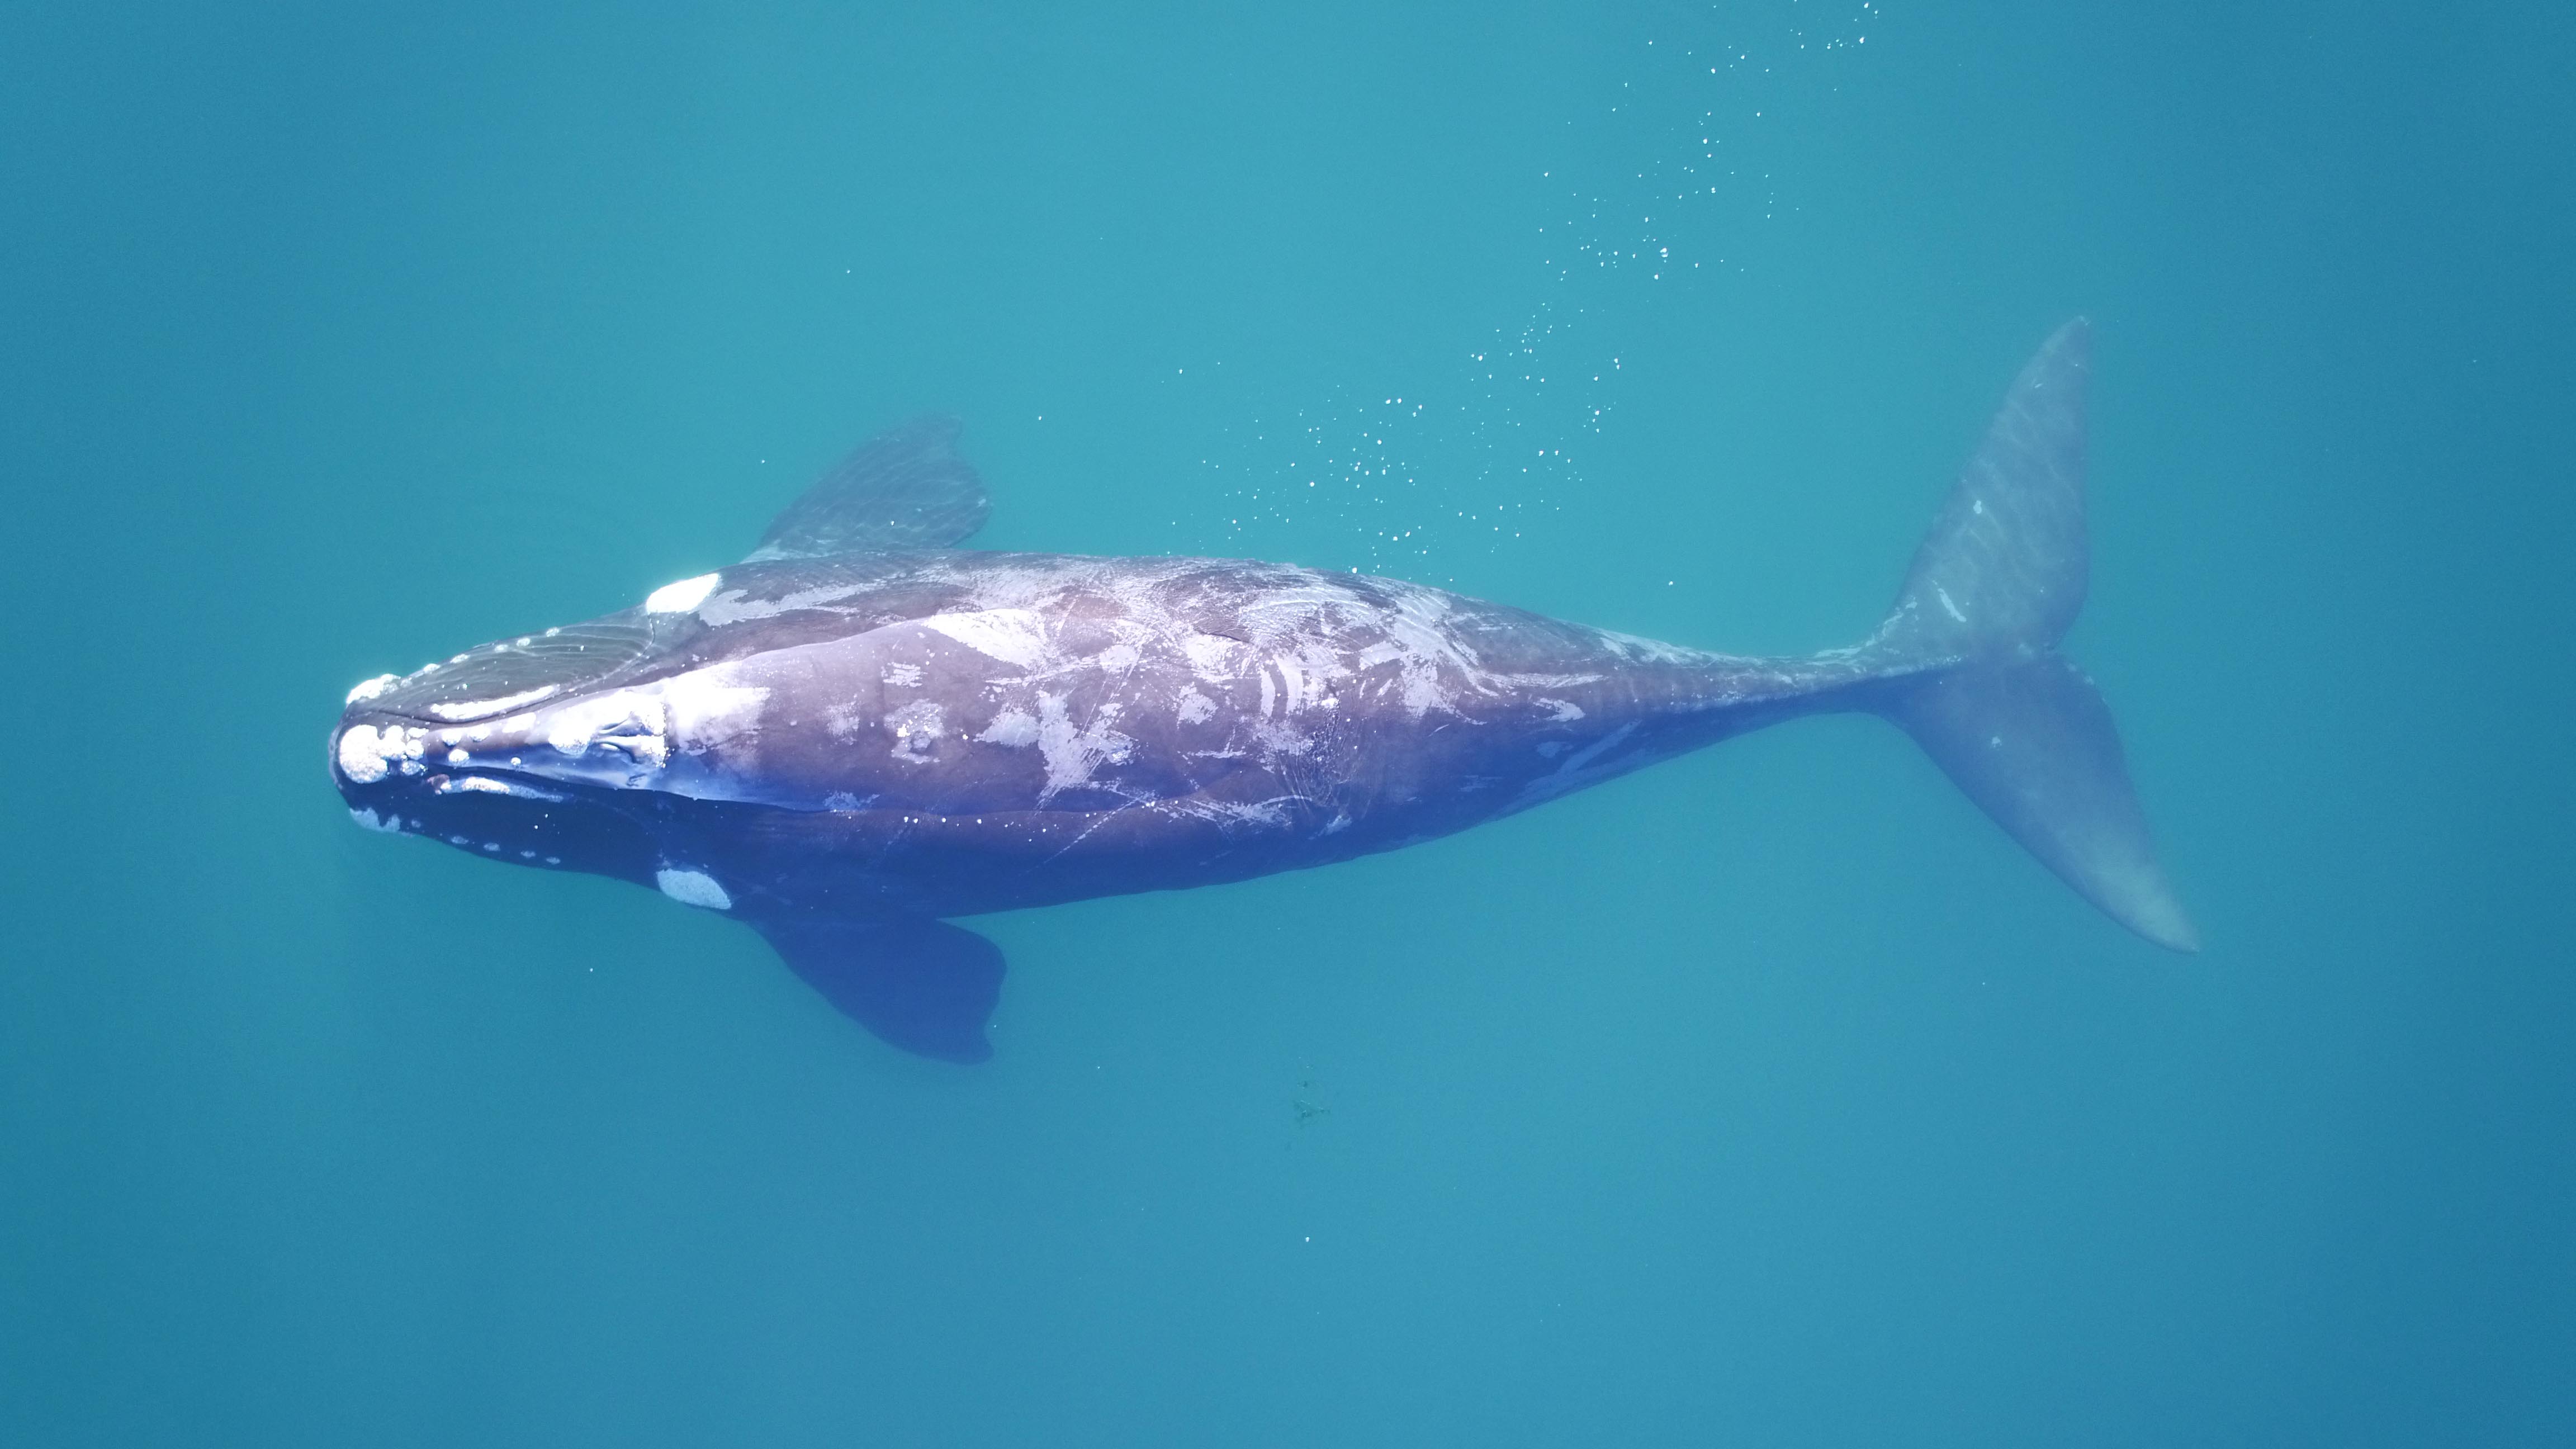 A southern right whale surfaces in the clear waters off the coast of Península Valdés. Photo by Fredrik Christiansen, Aarhus Institute of Advanced Studies